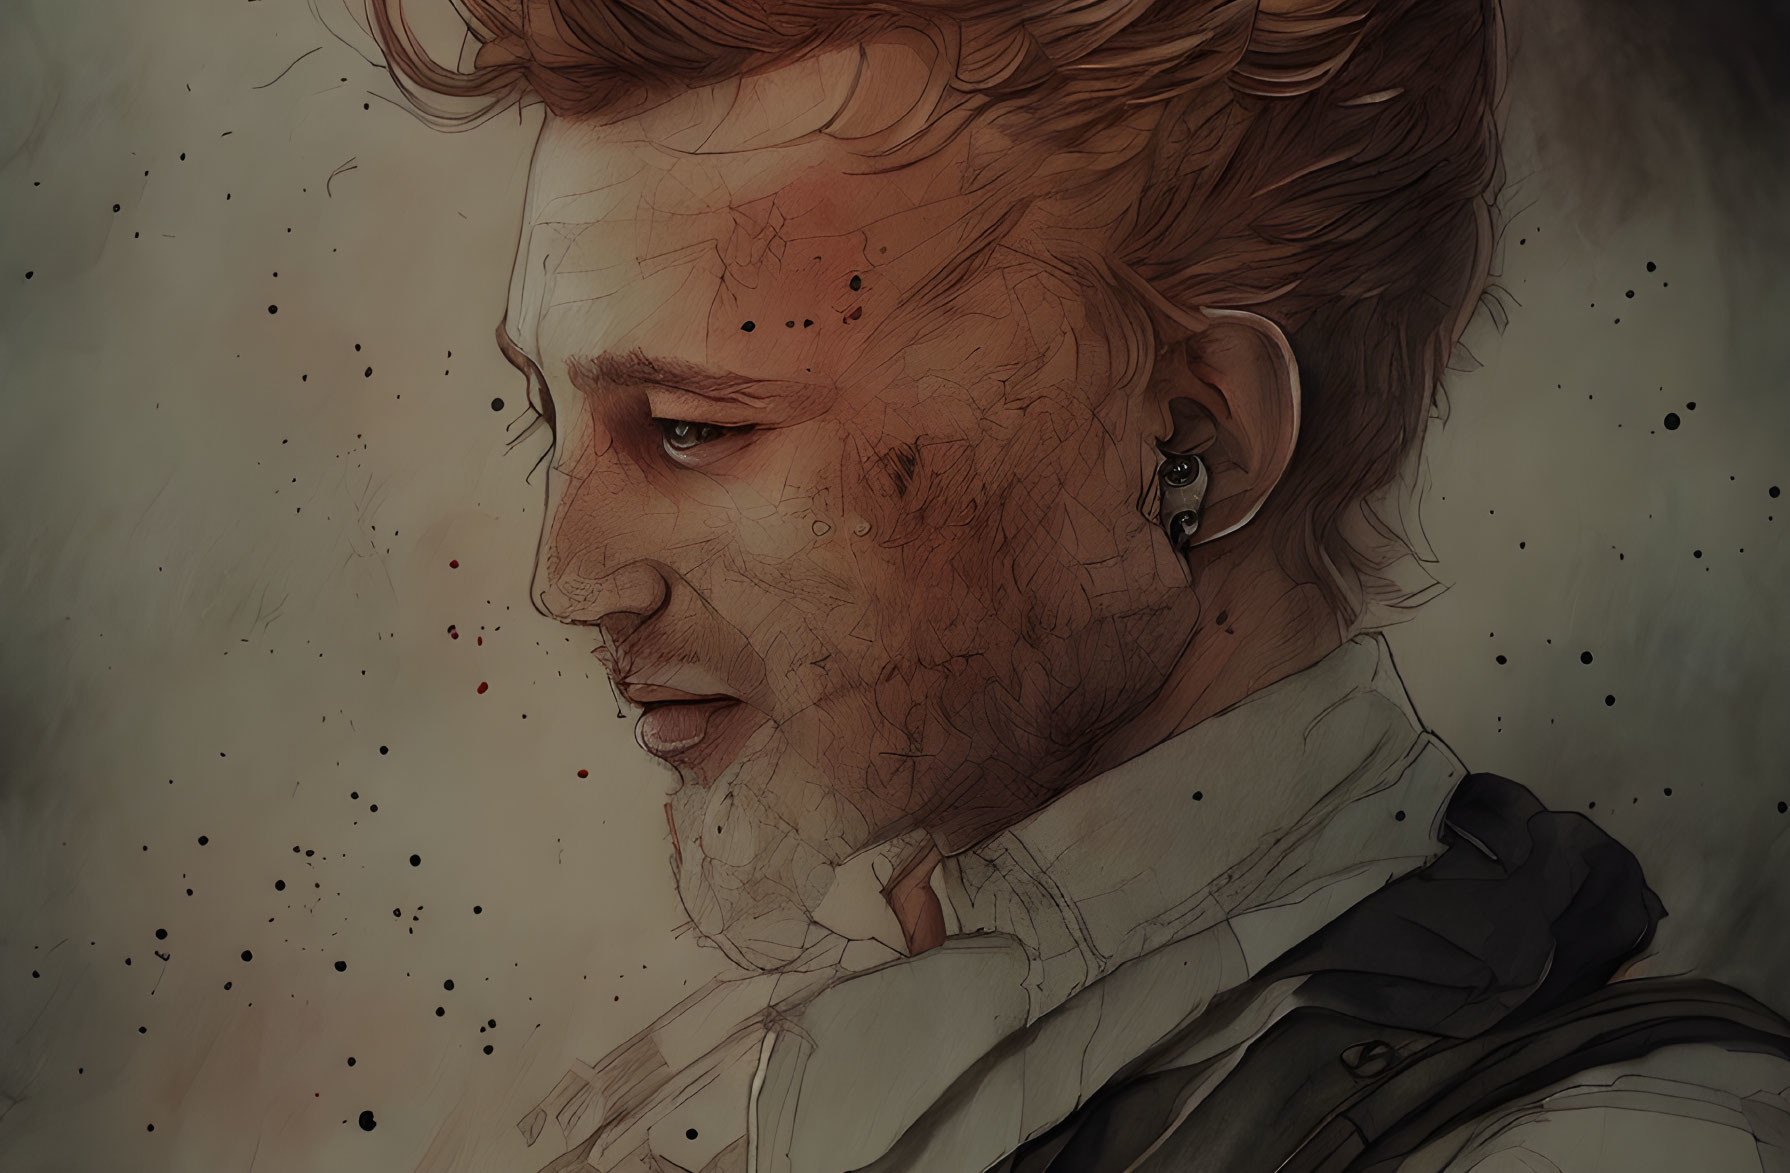 Detailed Facial Hair Man Illustration with Muted Colors & Splatter Texture